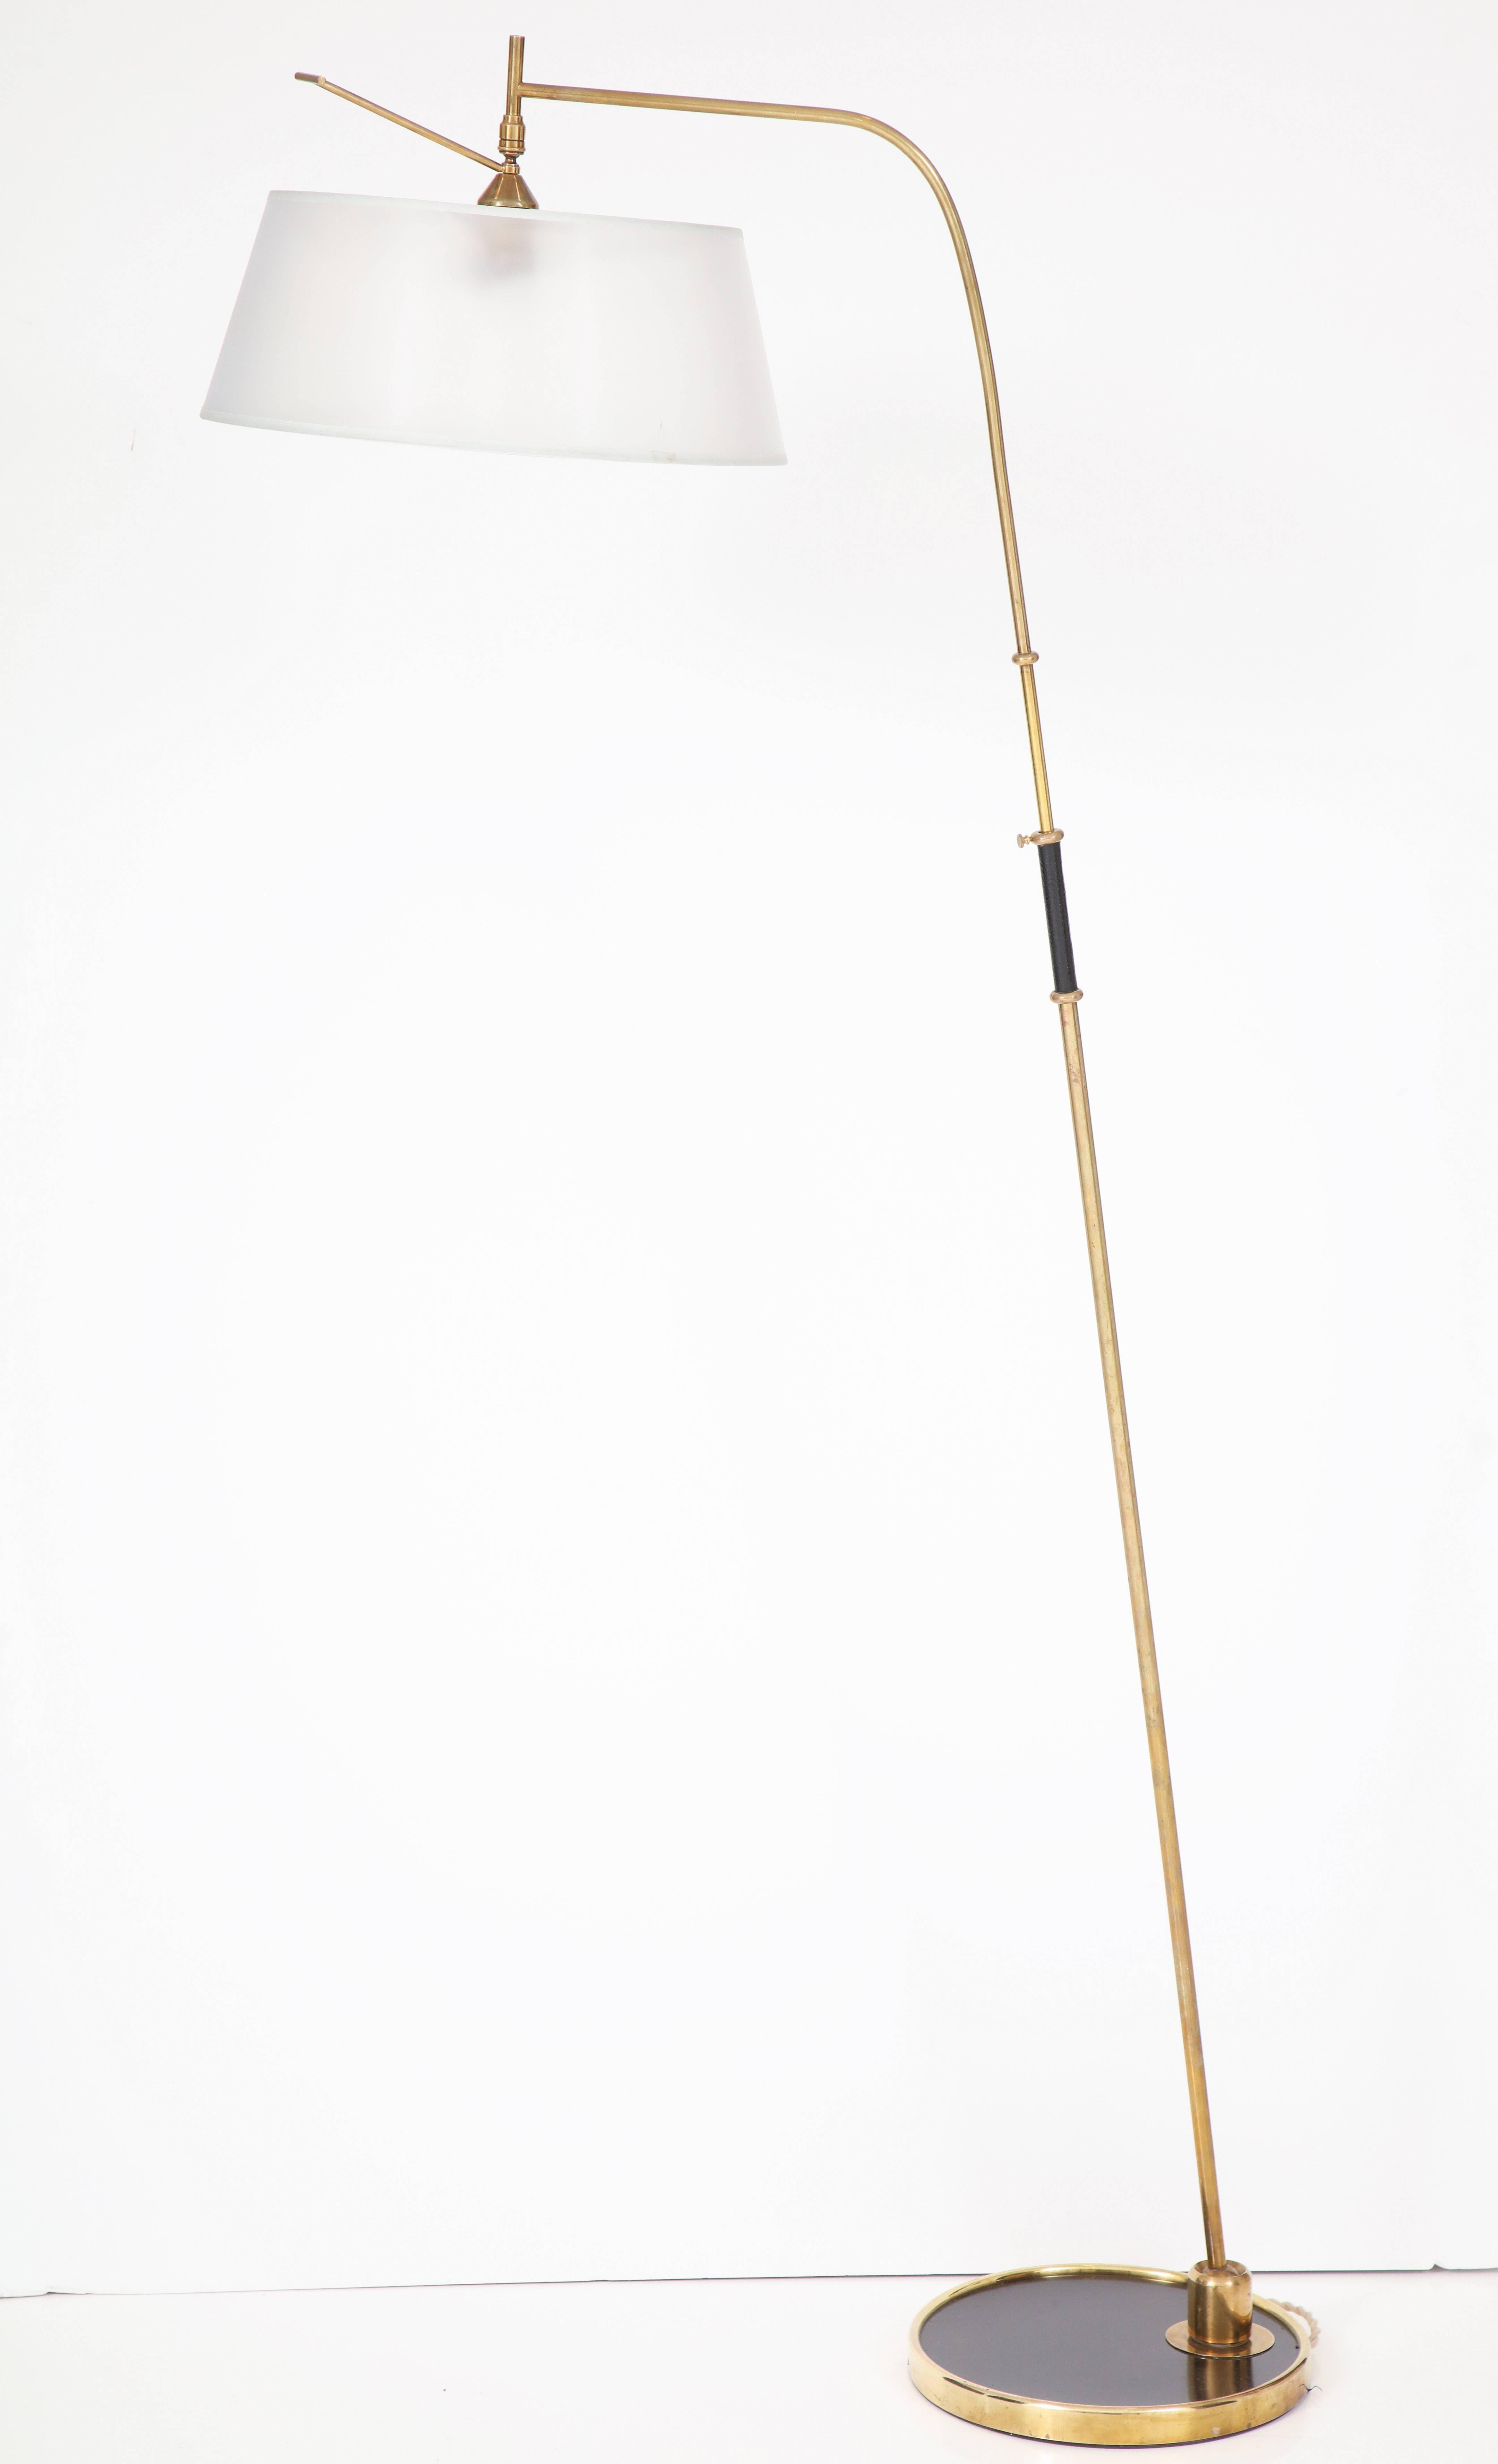 French Maison Lunel articulating floor lamp in brass. Articulating shade and shaft rotates 360, can achieve very dramatic angles in any direction forward, back, side to side.  The shaft is mounted to a ball socket which allows full circular